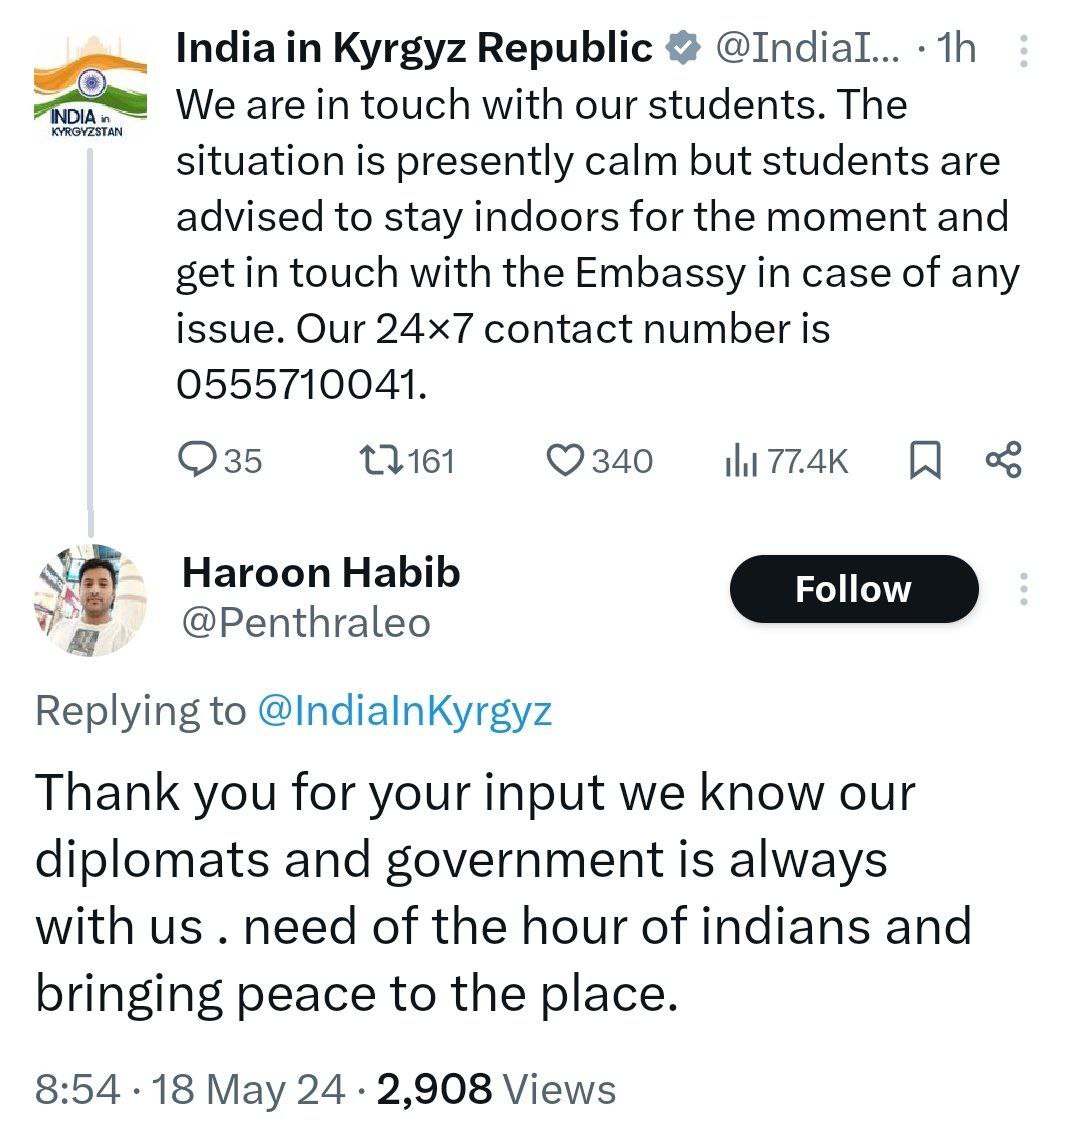 #Kyrgyzstan
Pic 1: Abdul tweeting 'Muslims under attack in India'.

Abdul leaves India 

Pic 2: Abdul showing confidence that Indian Govt will bring him back safely from Kyrgyzstan😂